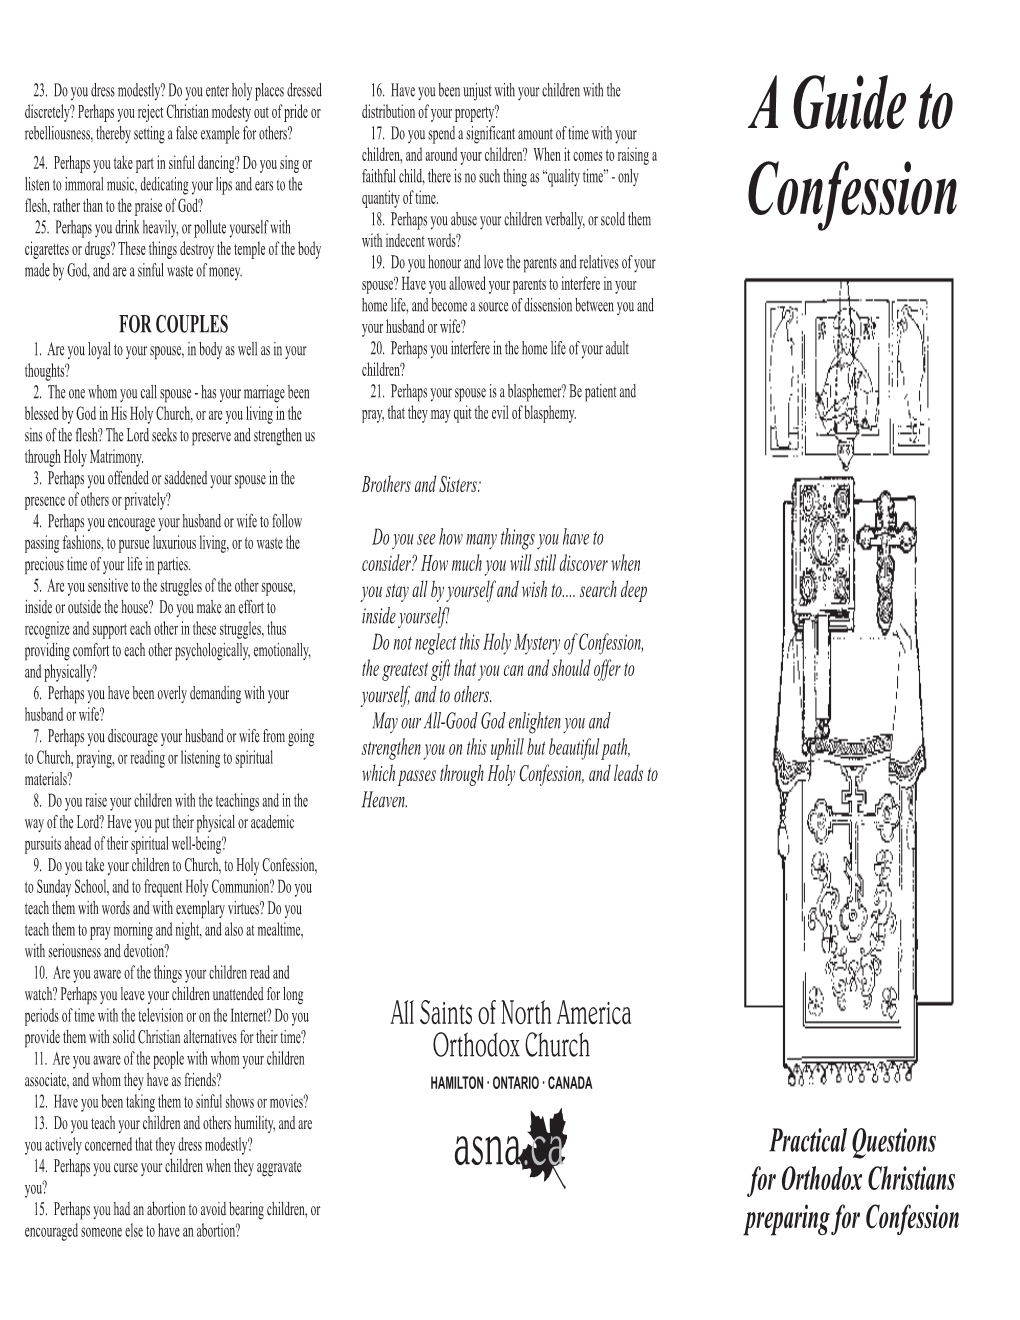 A Guide to Confession